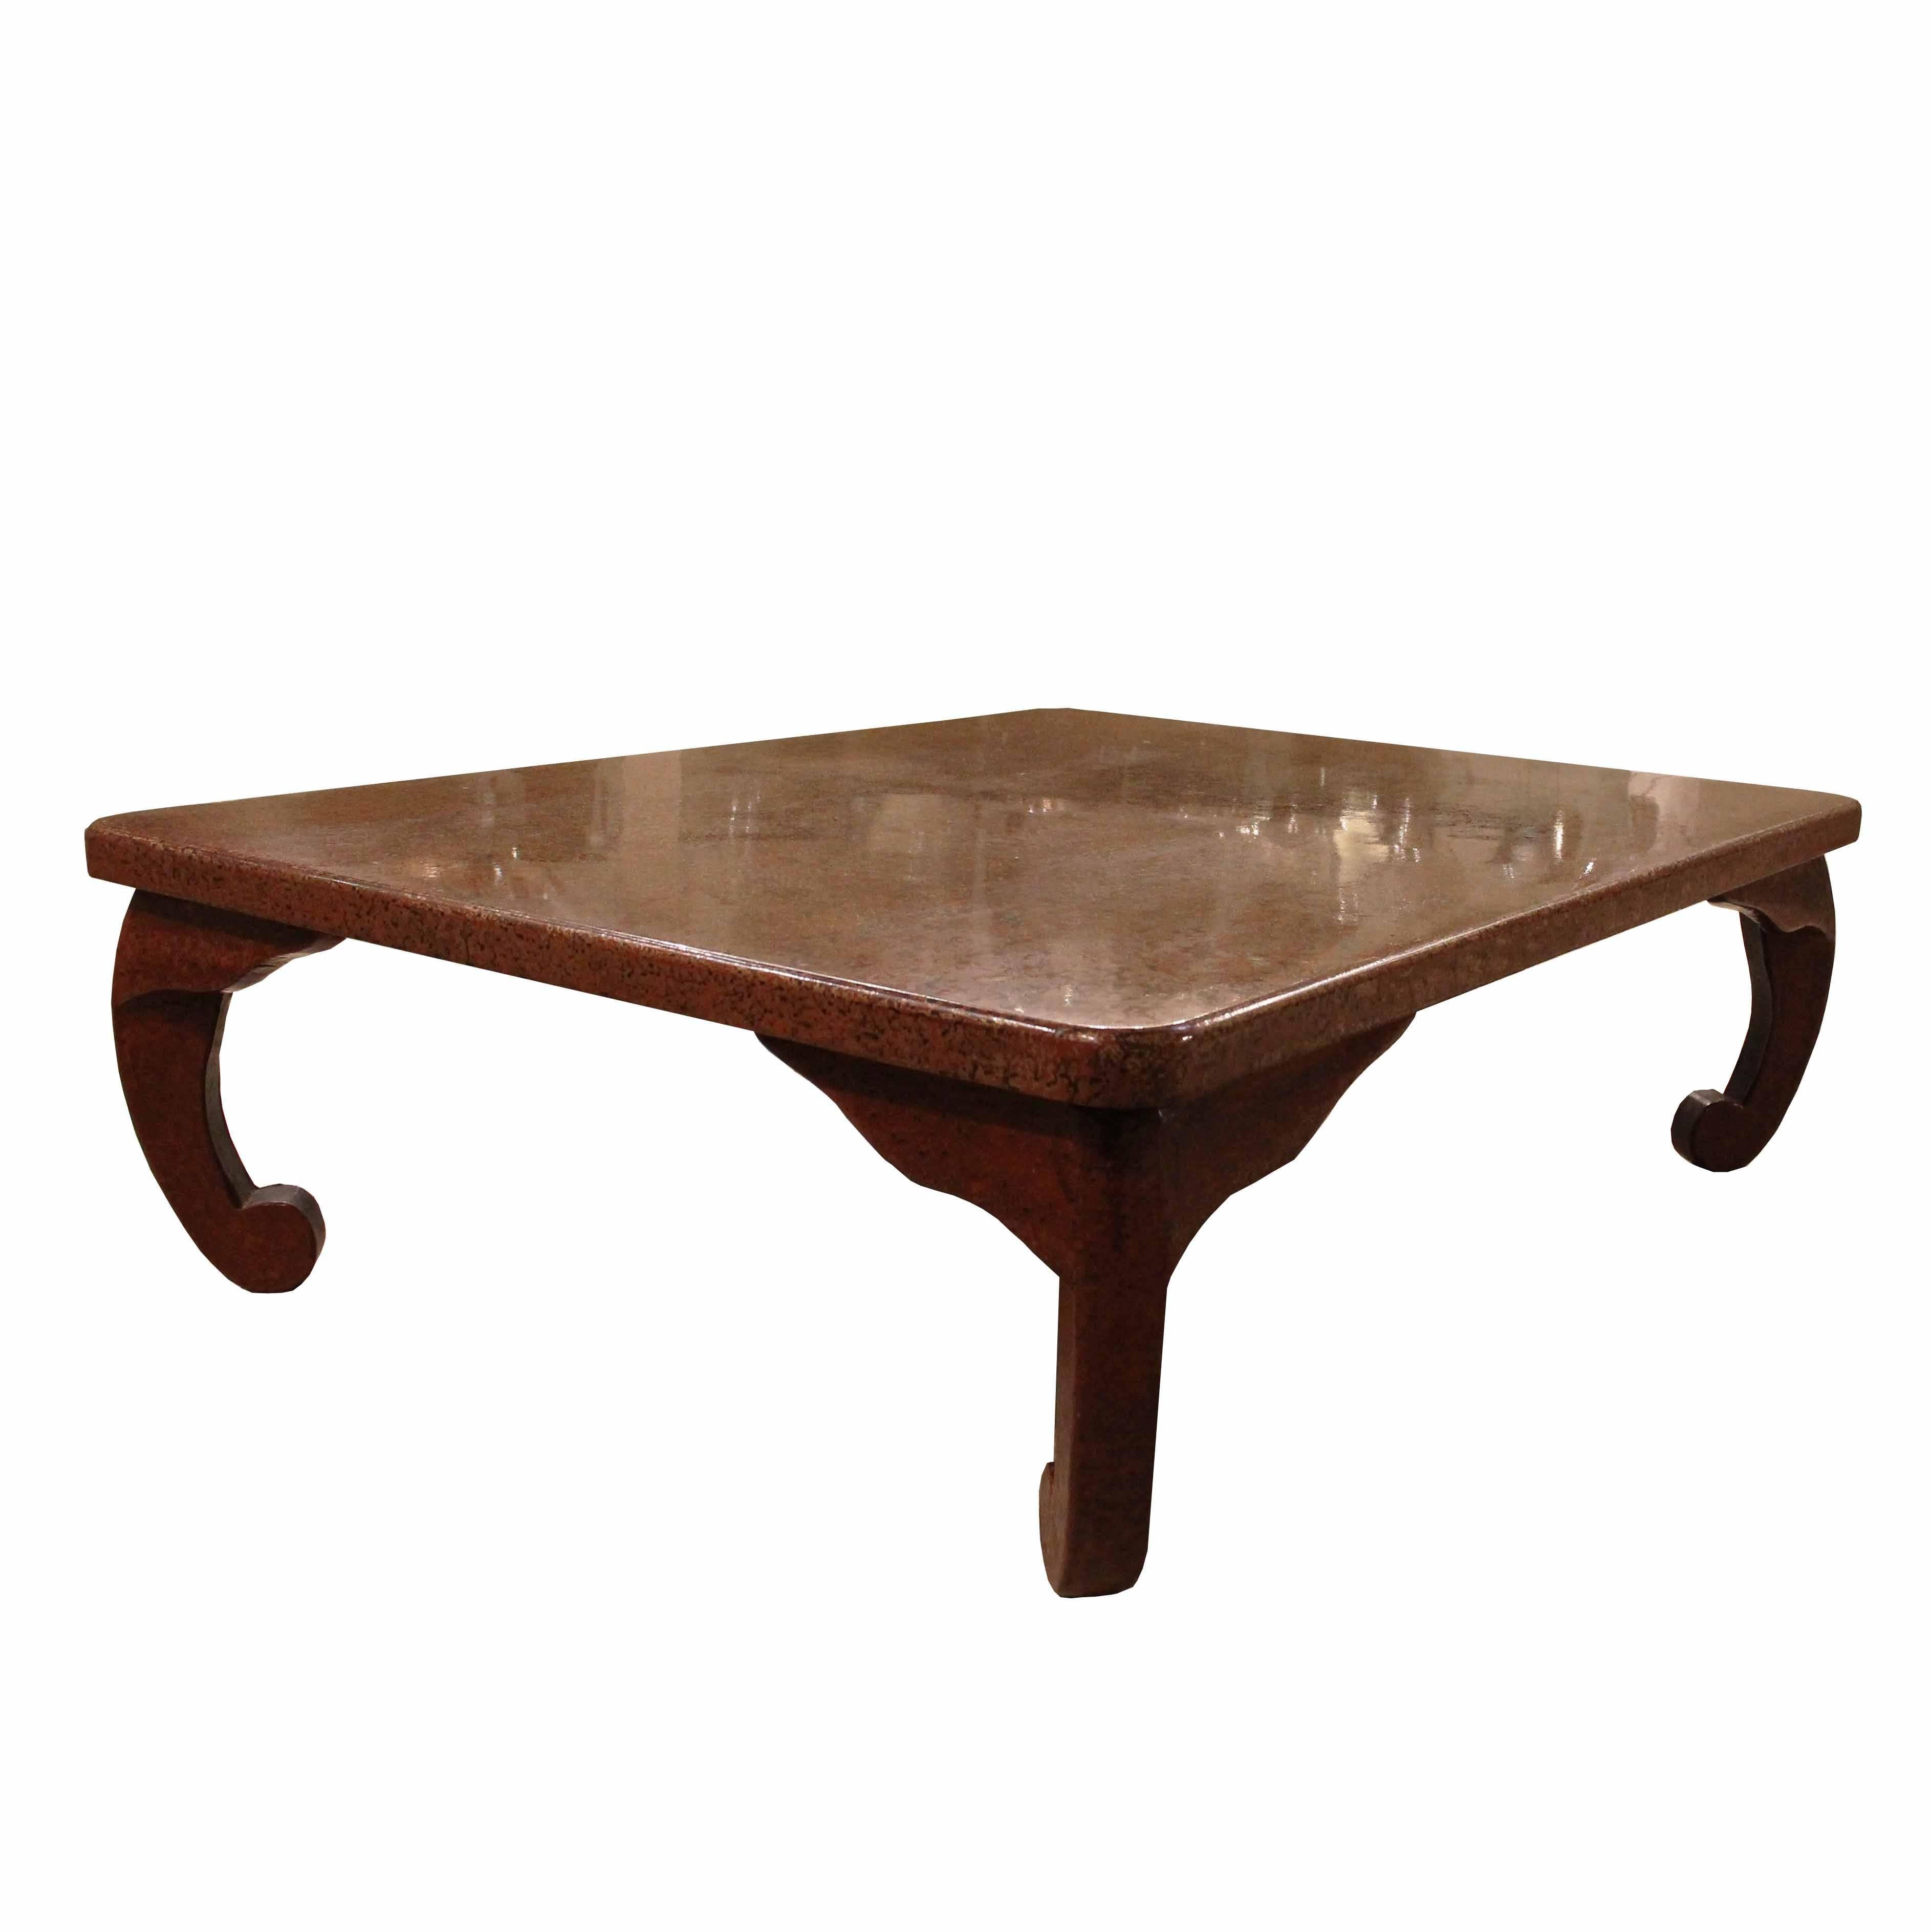 Japanese Wakasa Persimmon Lacquer Square Low Table 1